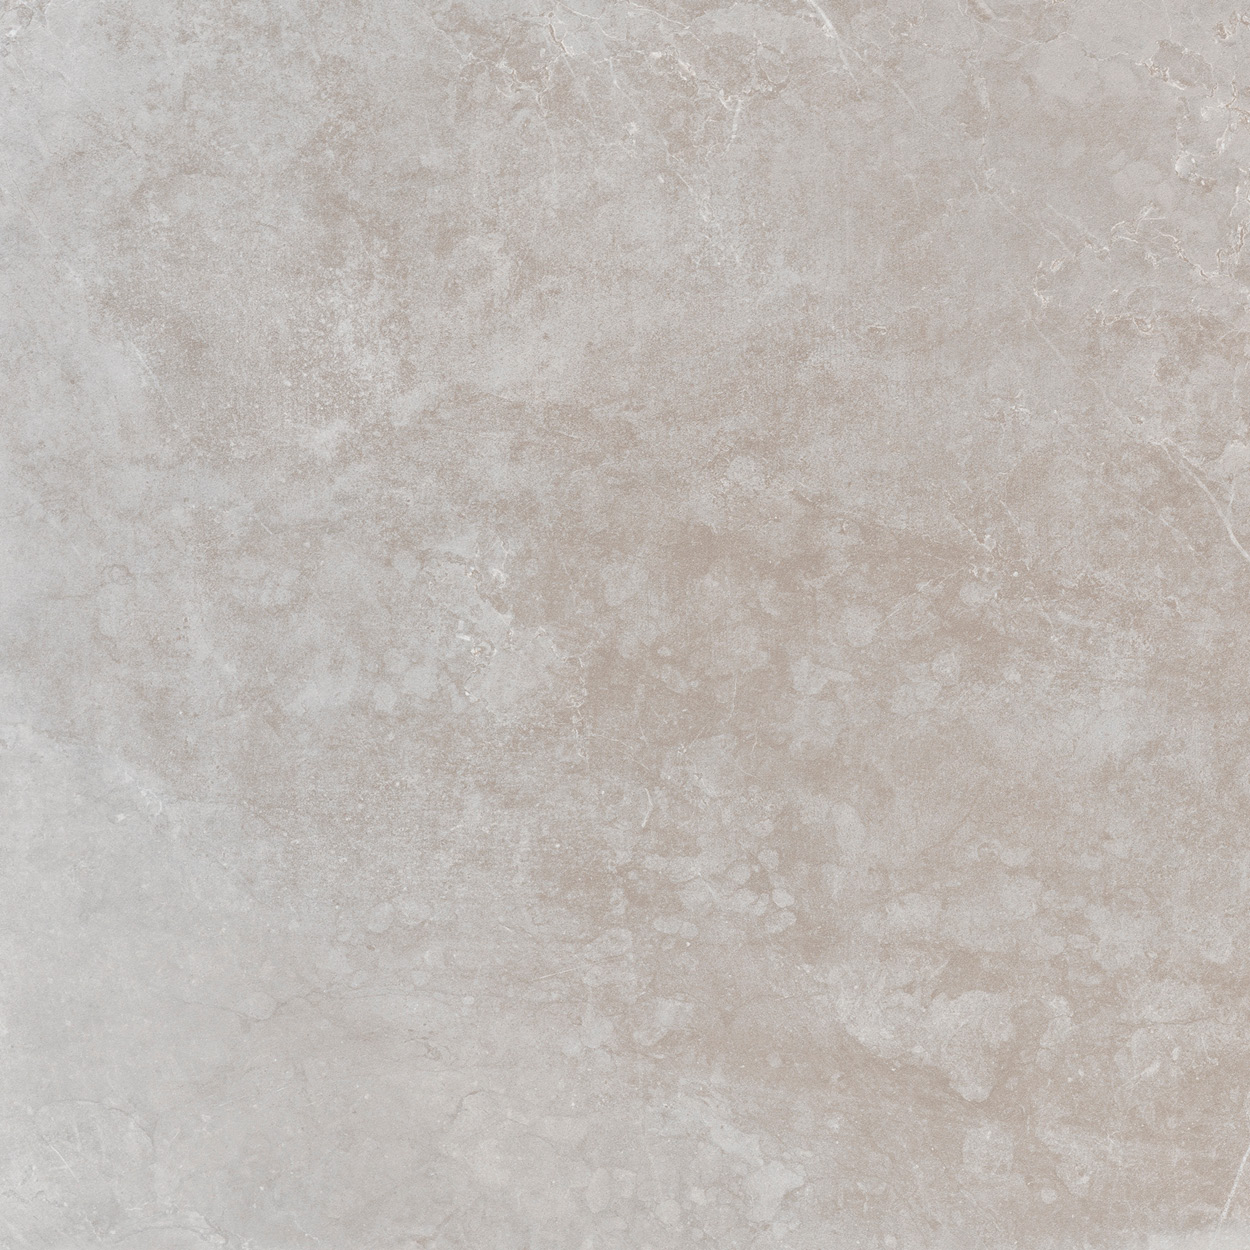 32 X 32 Evo Stone Mist Honed finished Rectified Porcelain Tile (SPECIAL ORDER ONLY)